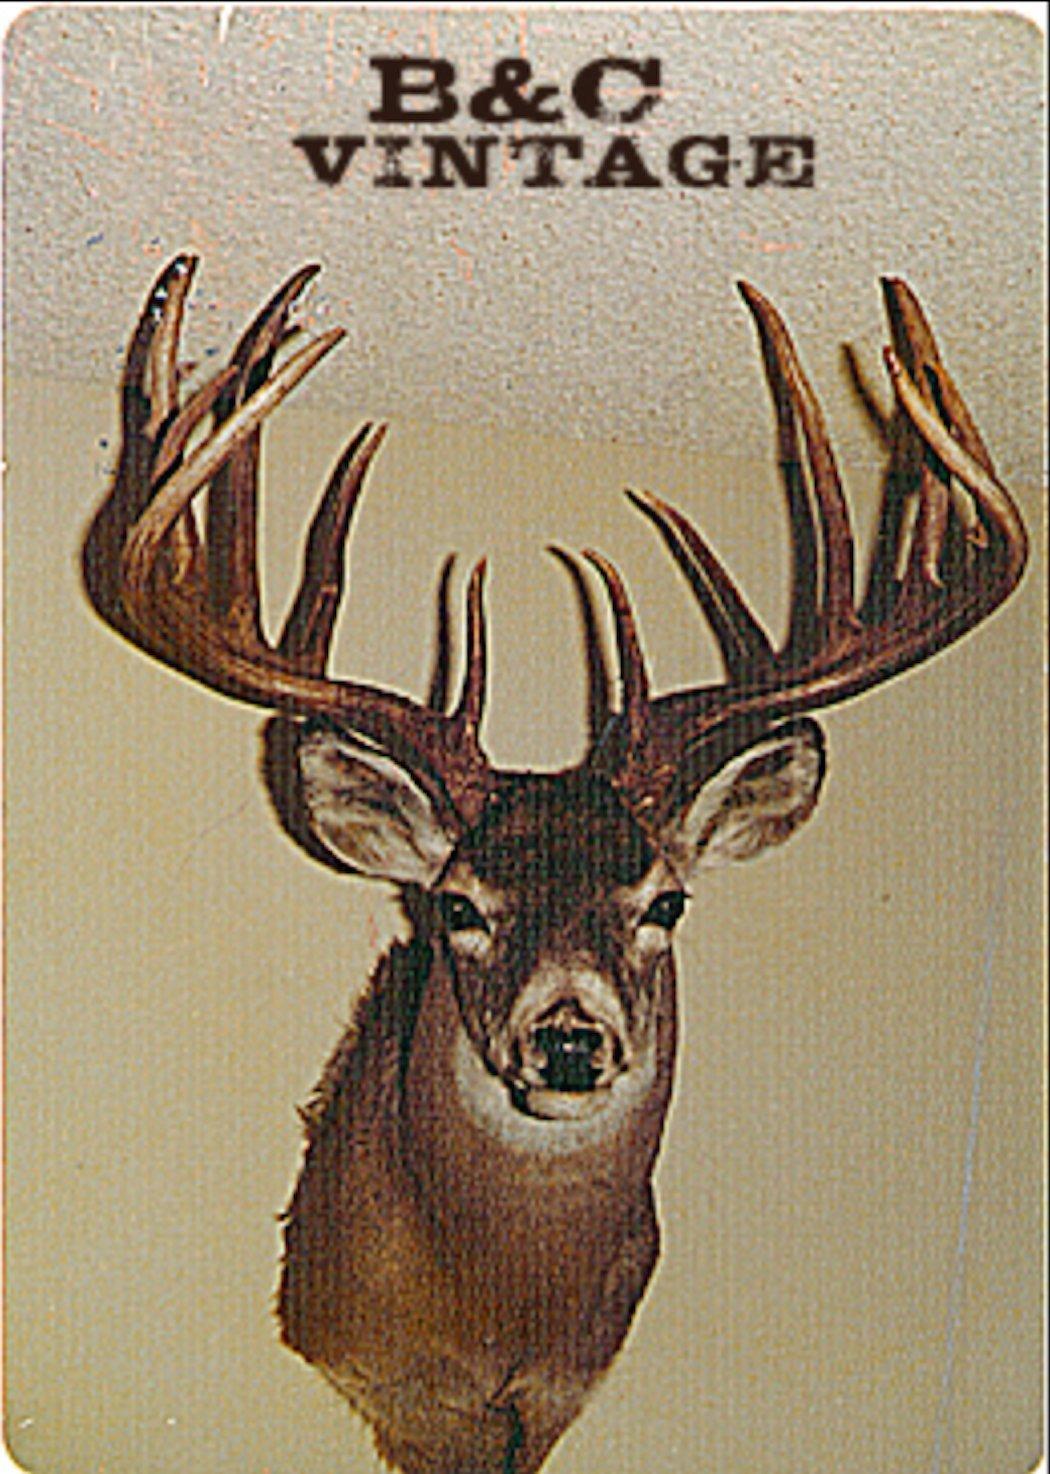 The Montana state record and the 20th largest typical buck of all time, the Dellwo buck has everything you could ever want in a giant typical whitetail. (Boone and Crockett photo)